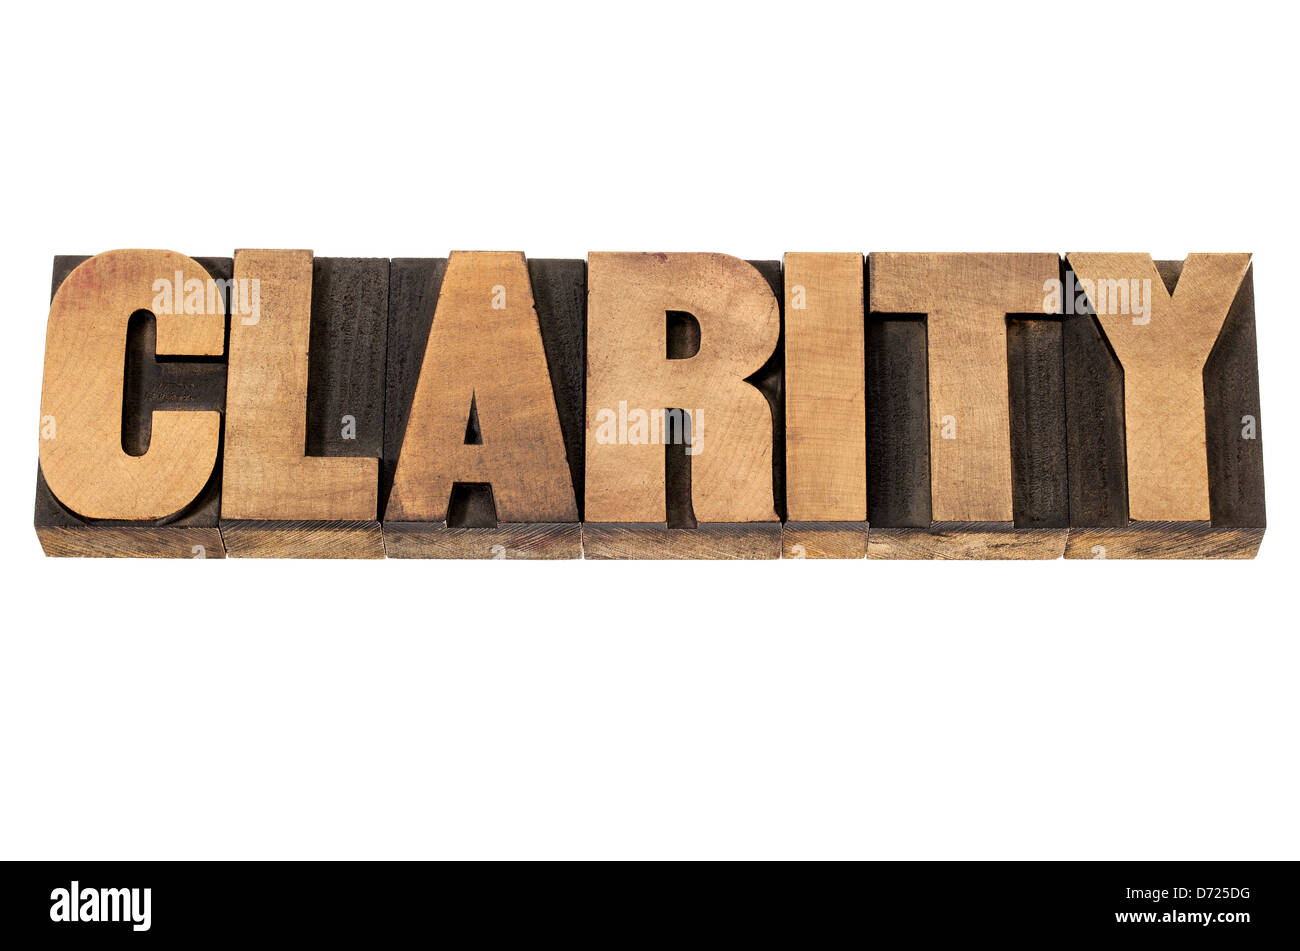 clarity word - isolated text in vintage letterpress wood type printing blocks Stock Photo